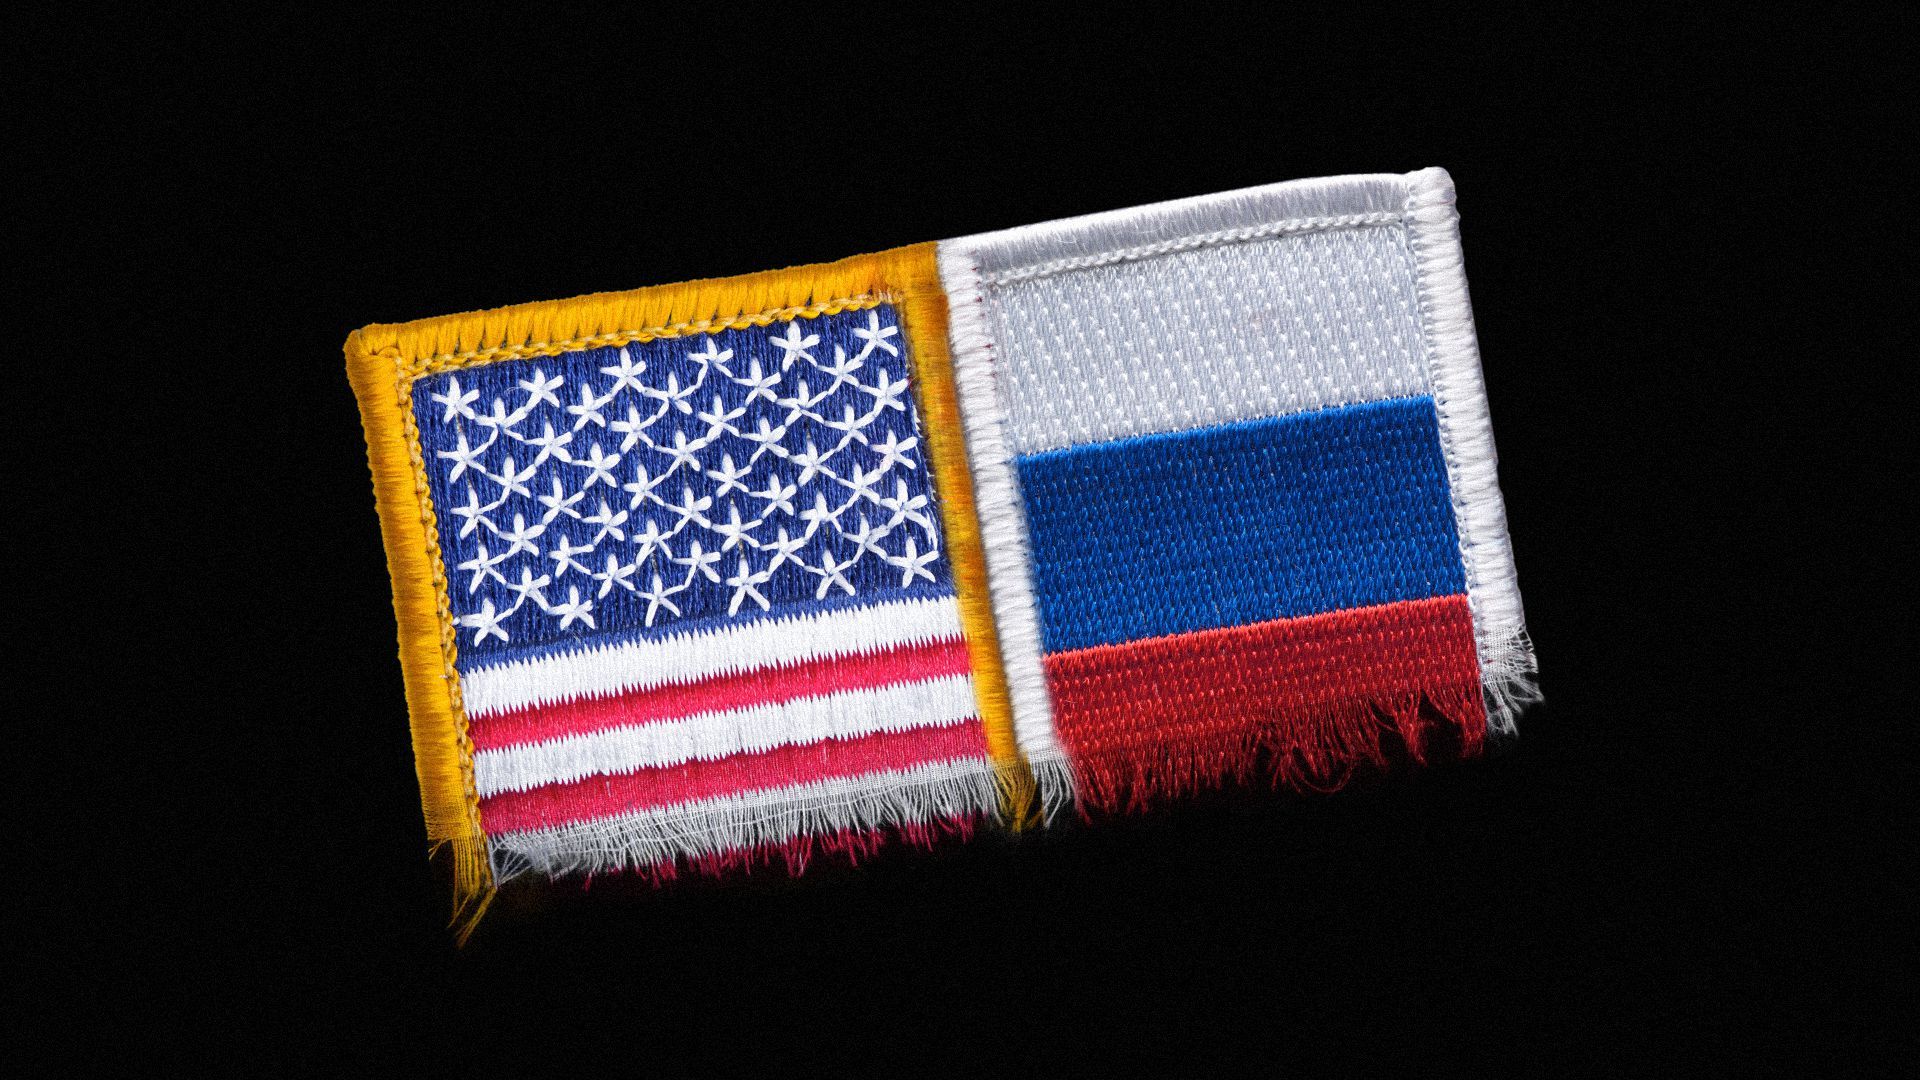 Illustration of a flag patch made up of the American and Russian flags unravelling. 